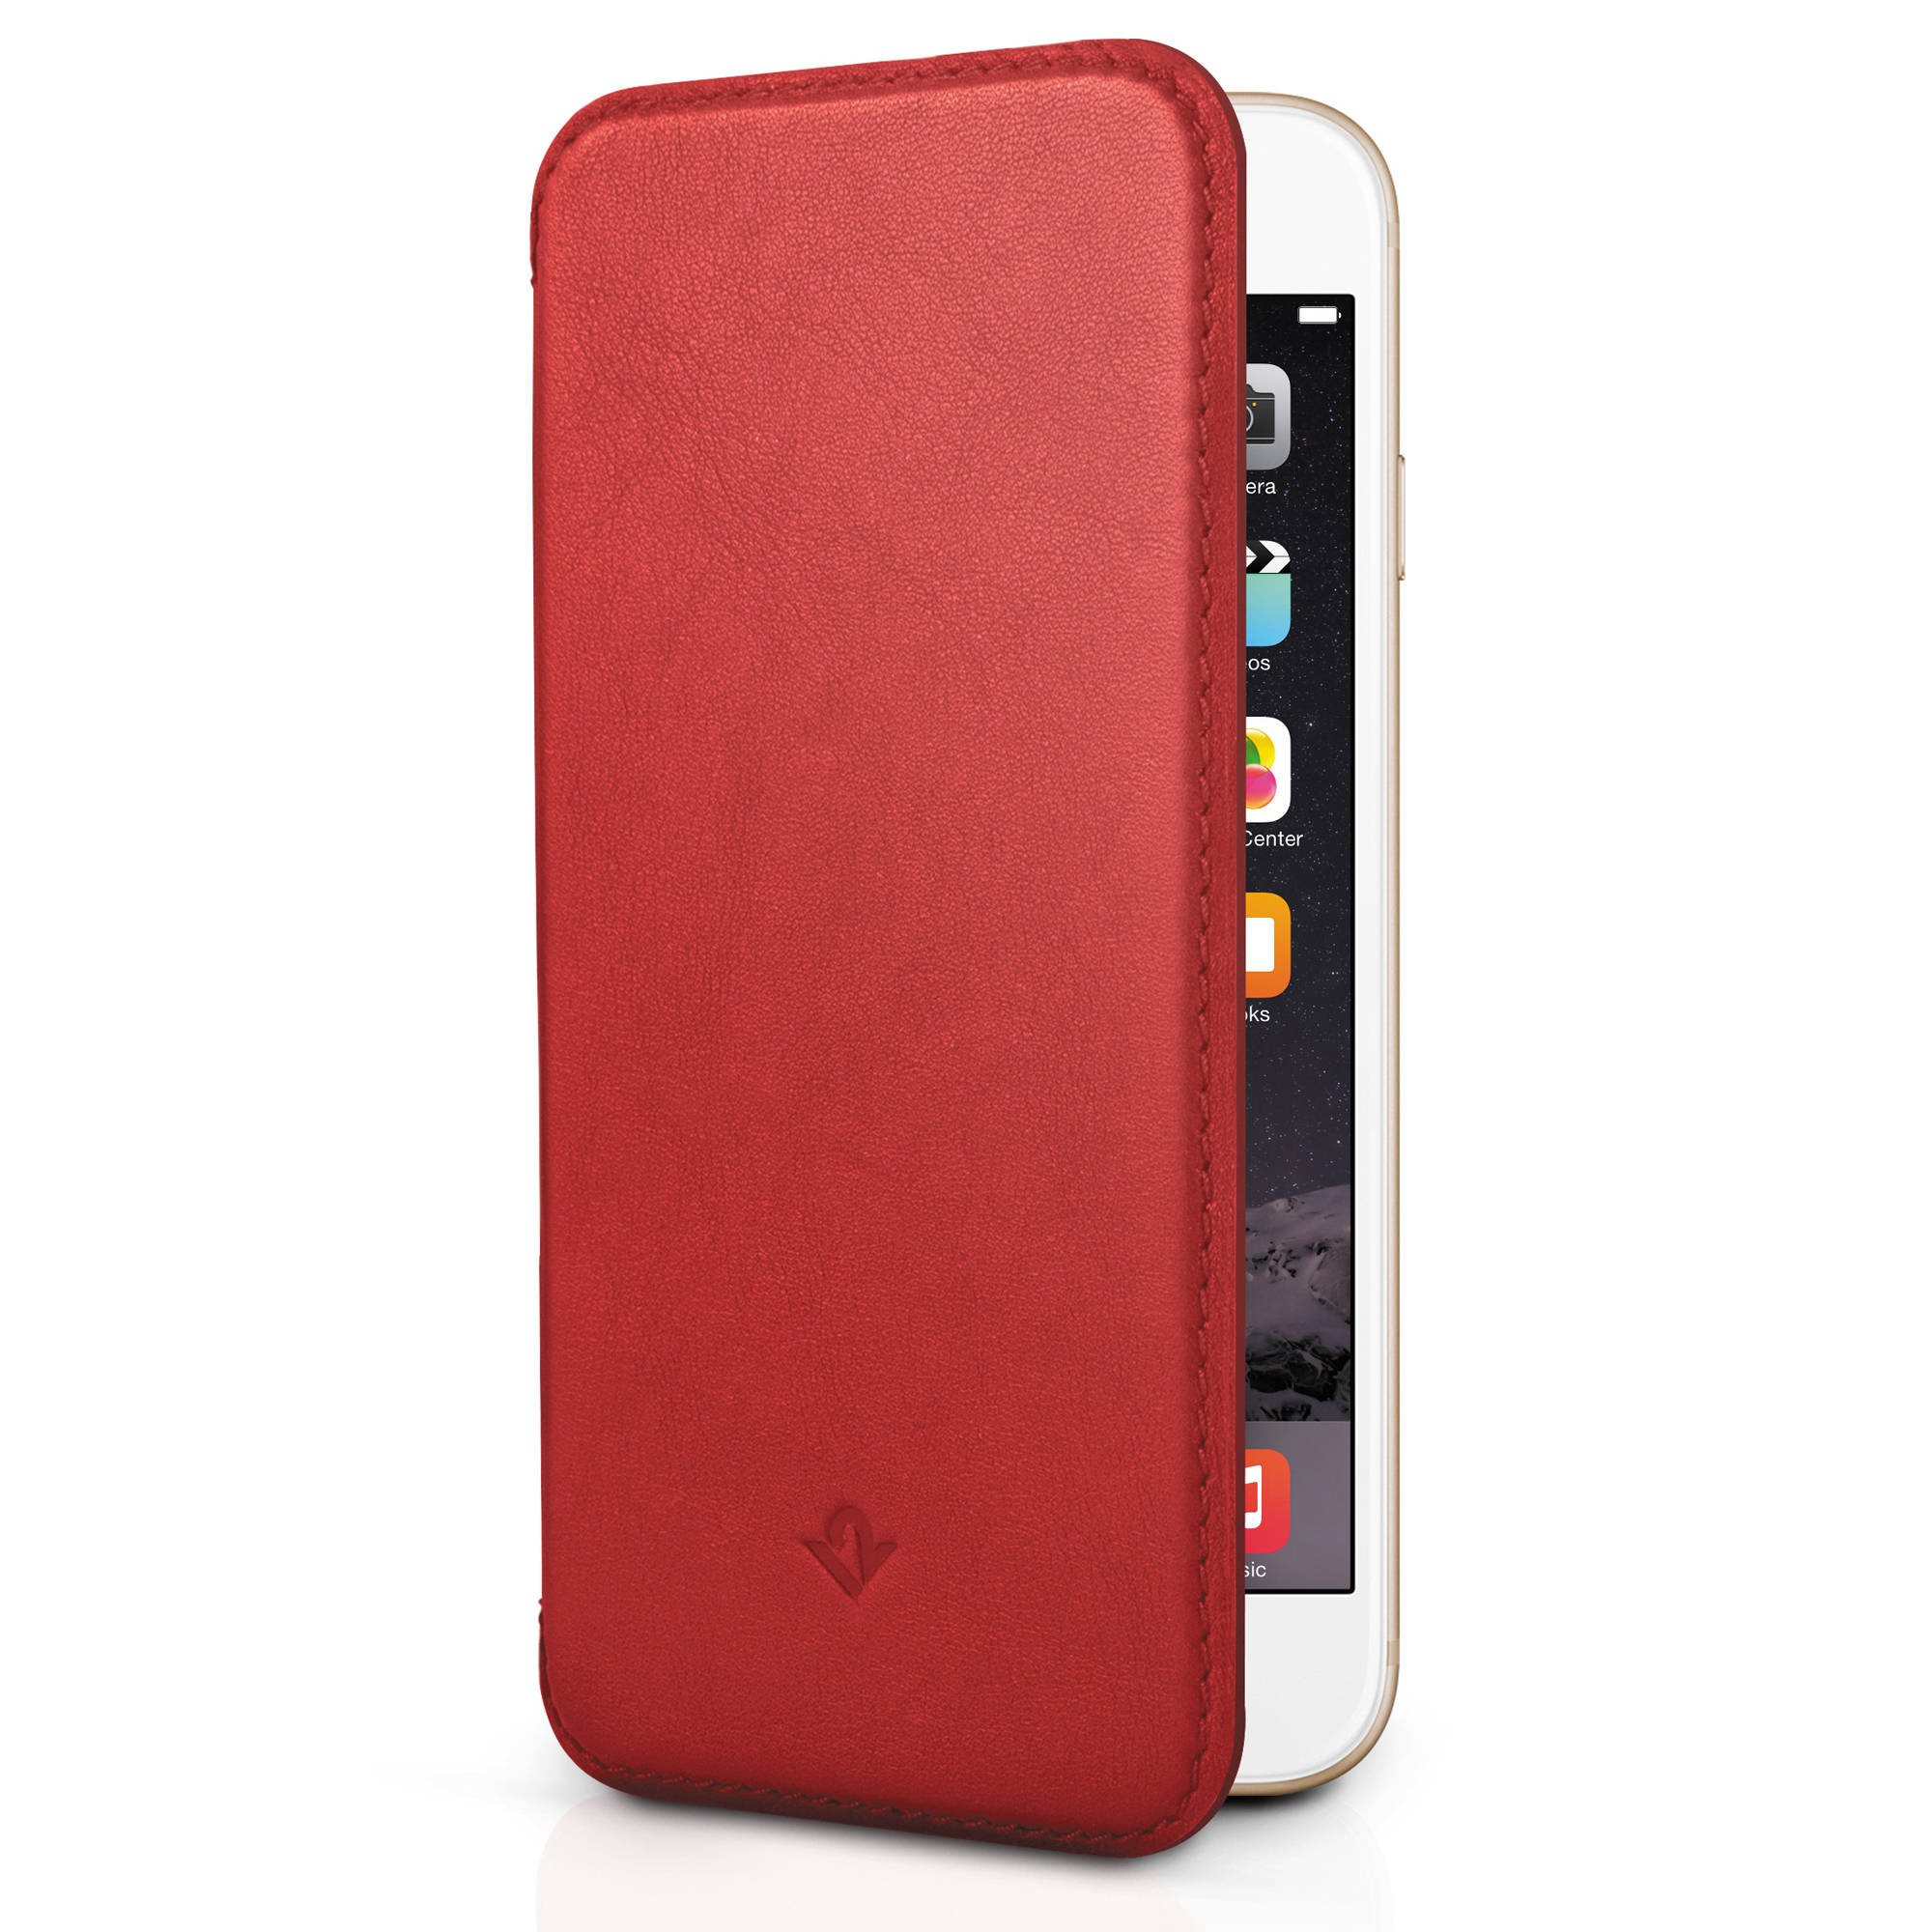 Twelve South SurfacePad for iPhone 6 Plus (Red)